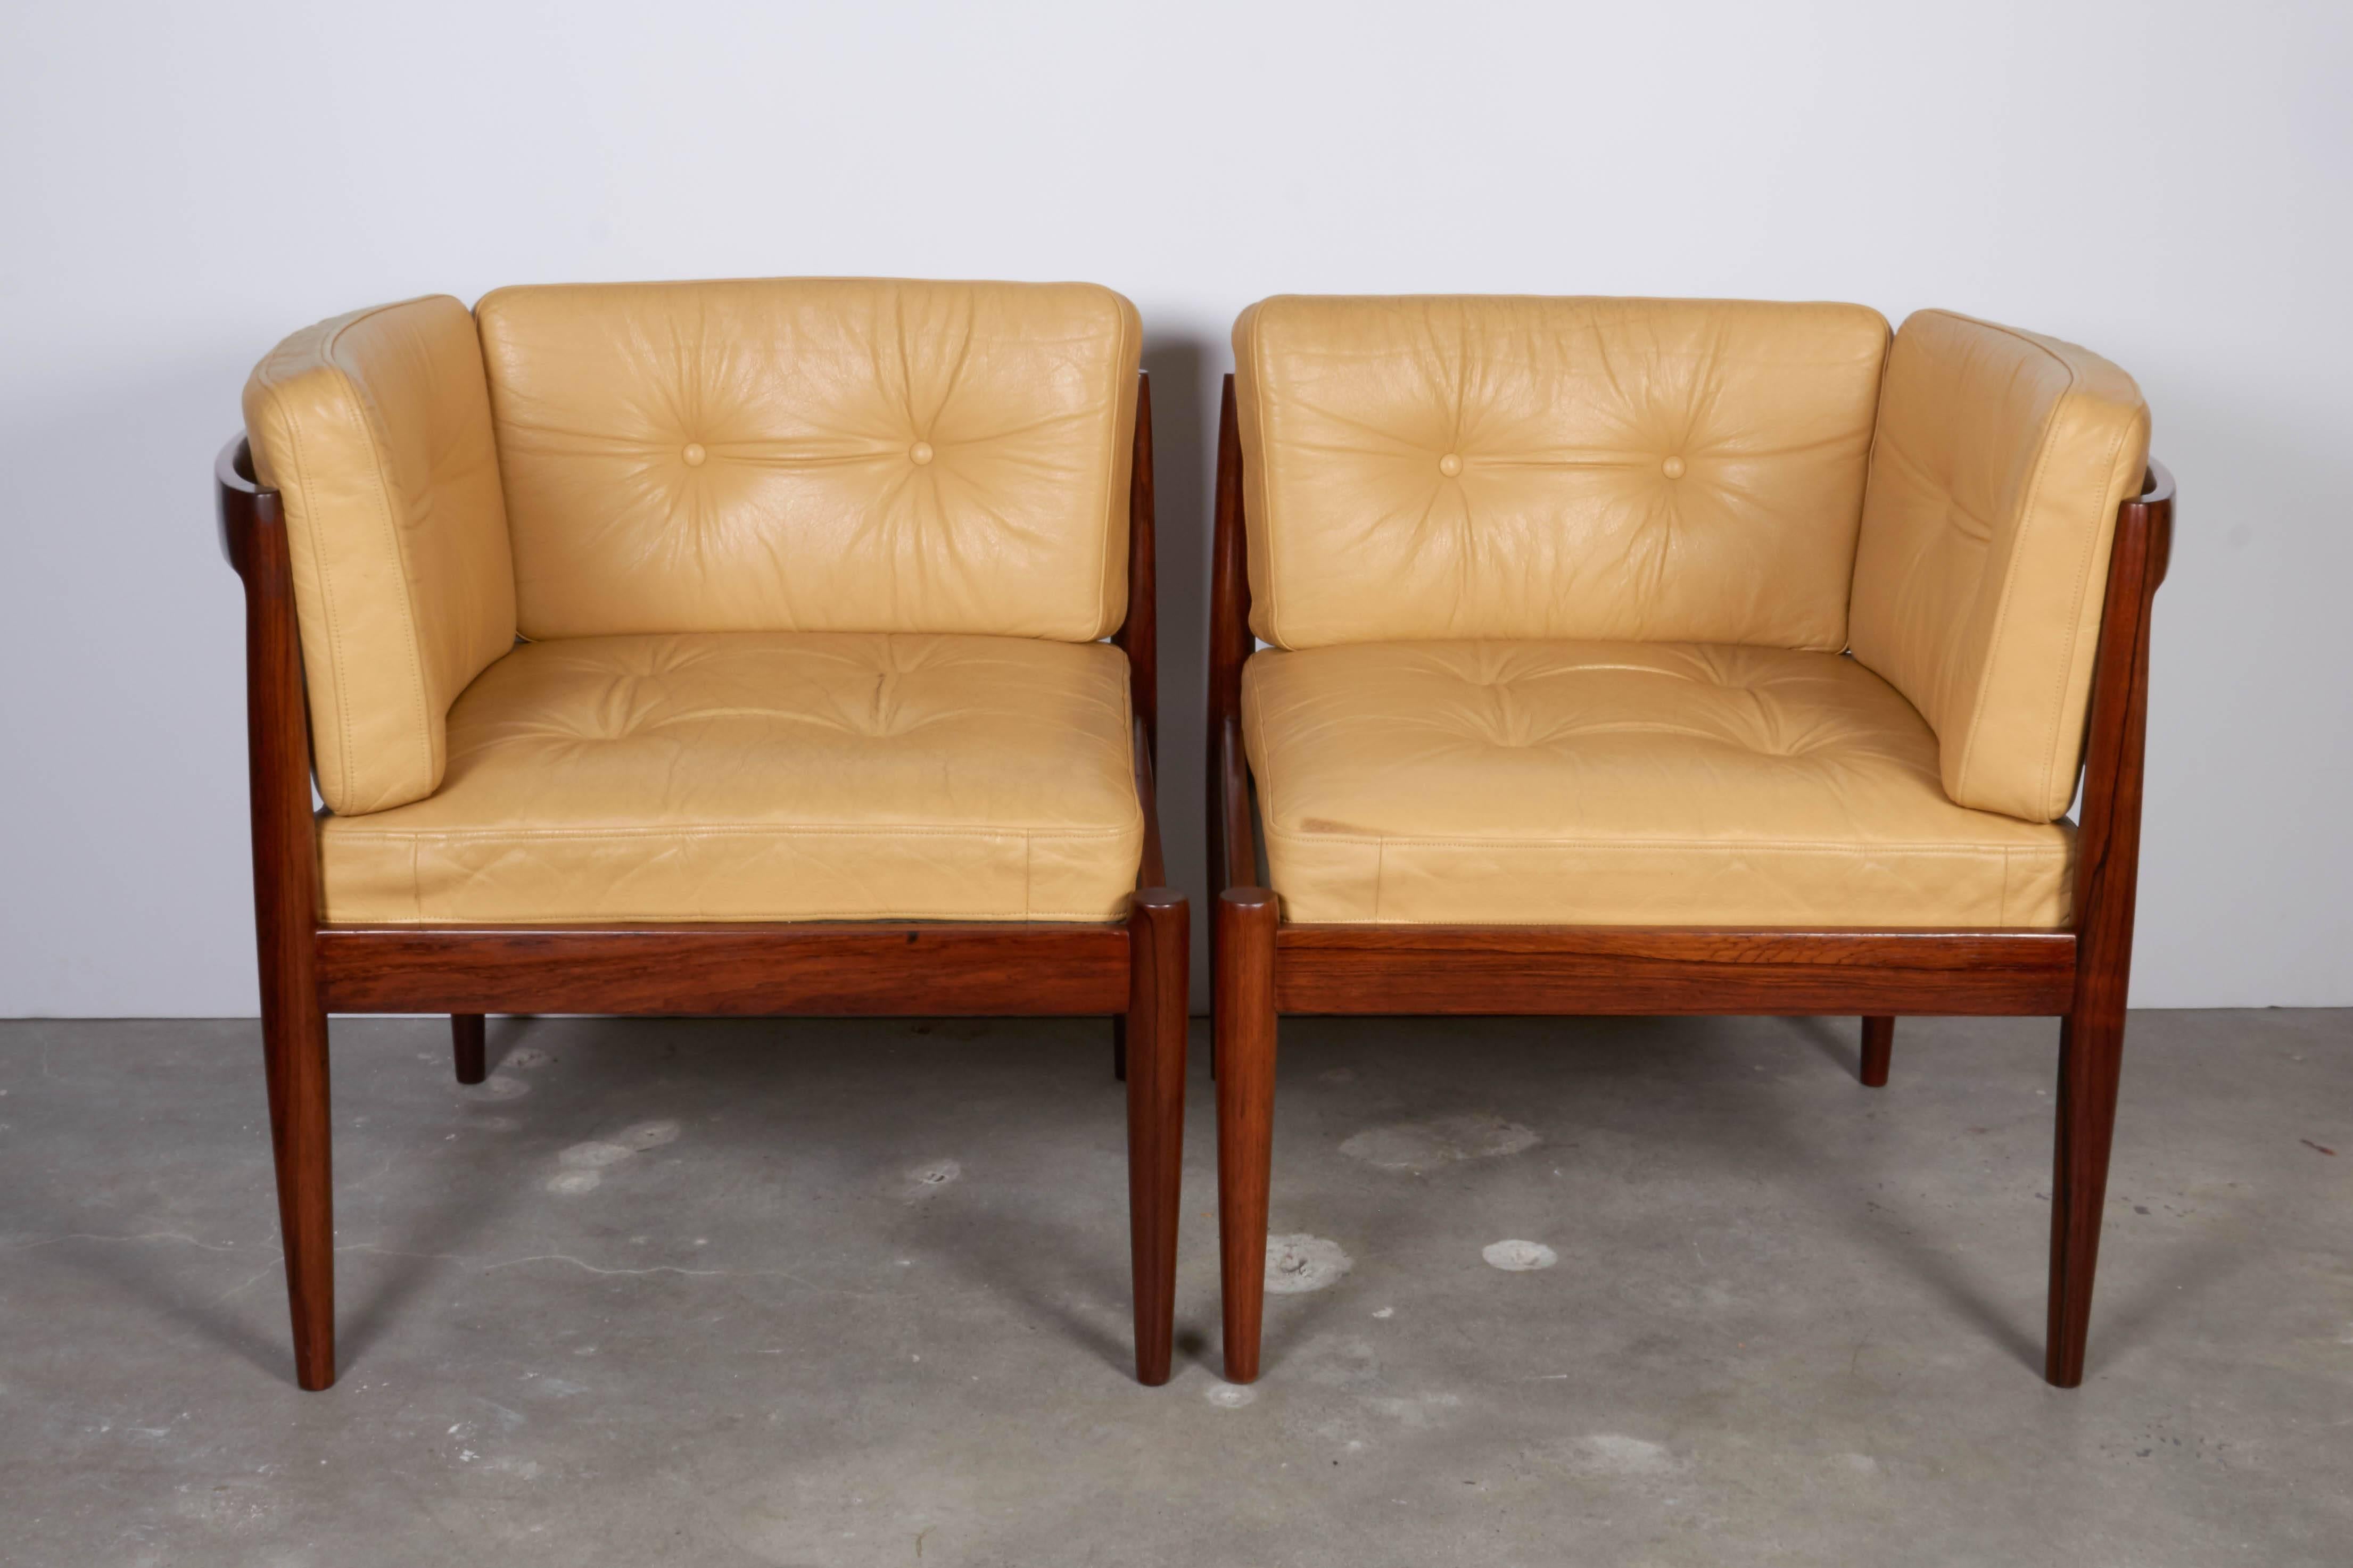 Vintage 1960s Kai Kristiansen Lounge Chairs

This pair of chairs is part of the Modul Line Sofa series by Kai Kristiansen. Excellent condition, and can be pushed together to create a love seat. Upholstery available. Ready for pick up, delivery, or